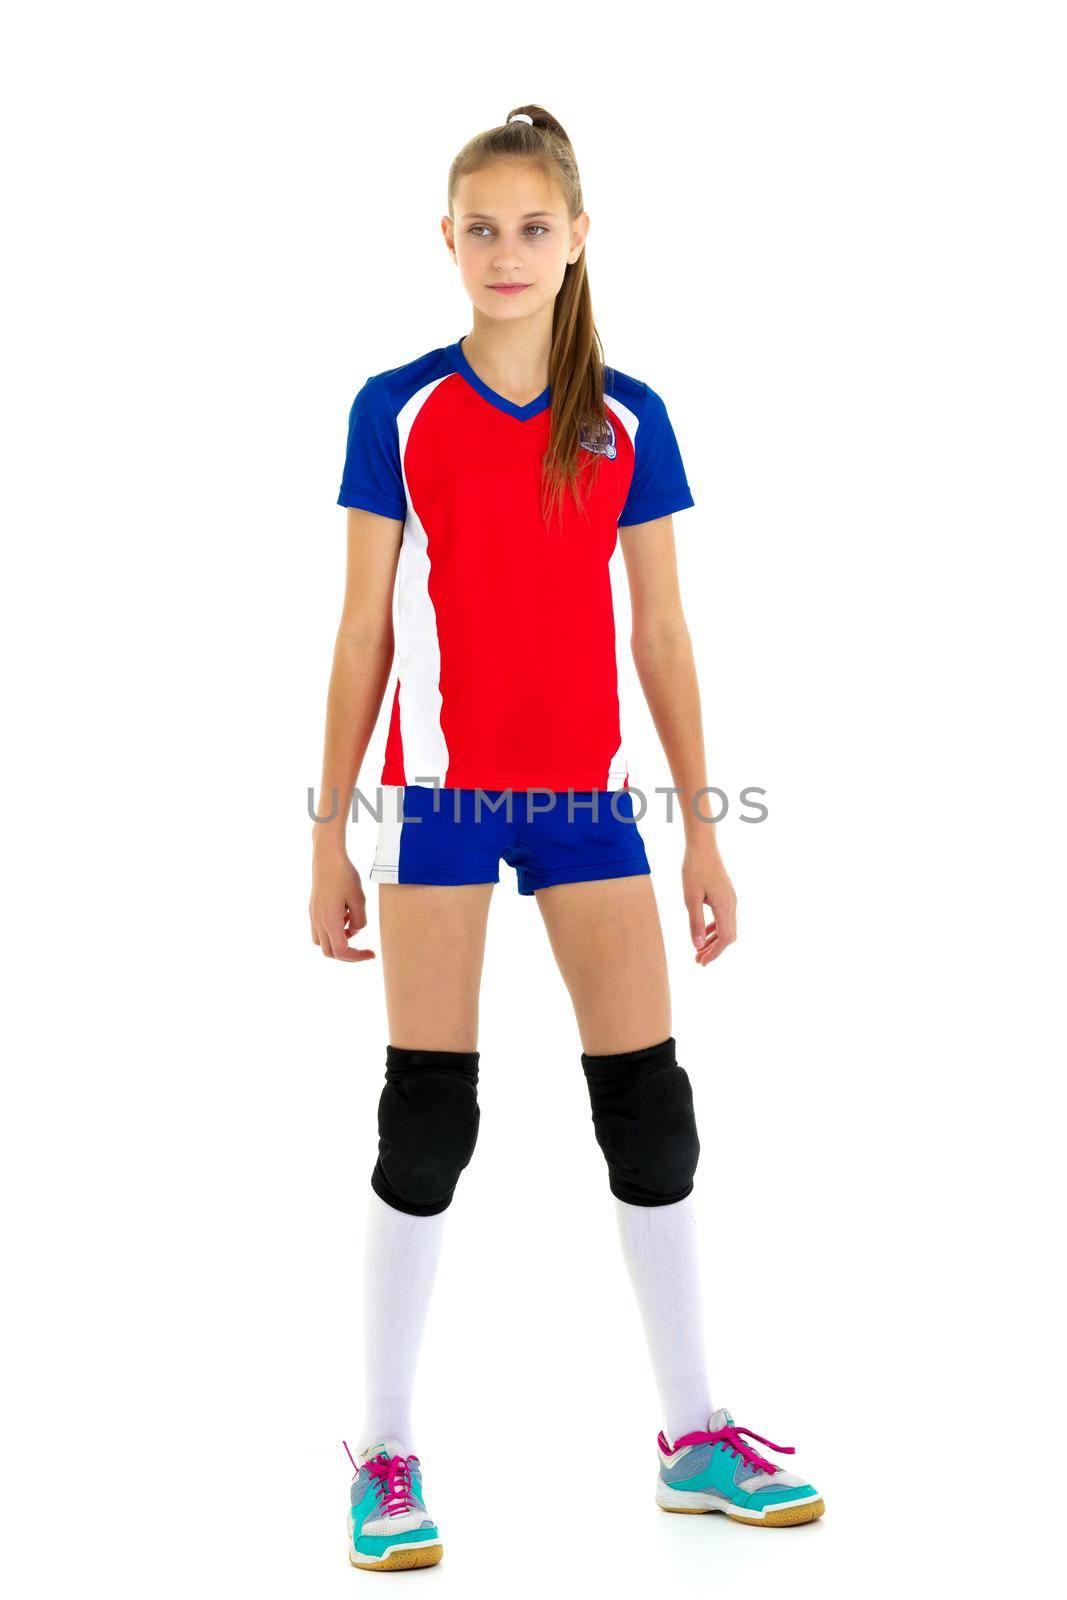 Full length shot of girl volleyball player. Pretty teenage girl in sports uniform, knee pads and sneakers standing on isolated white background. Healthy lifestyle, training, fitness concept